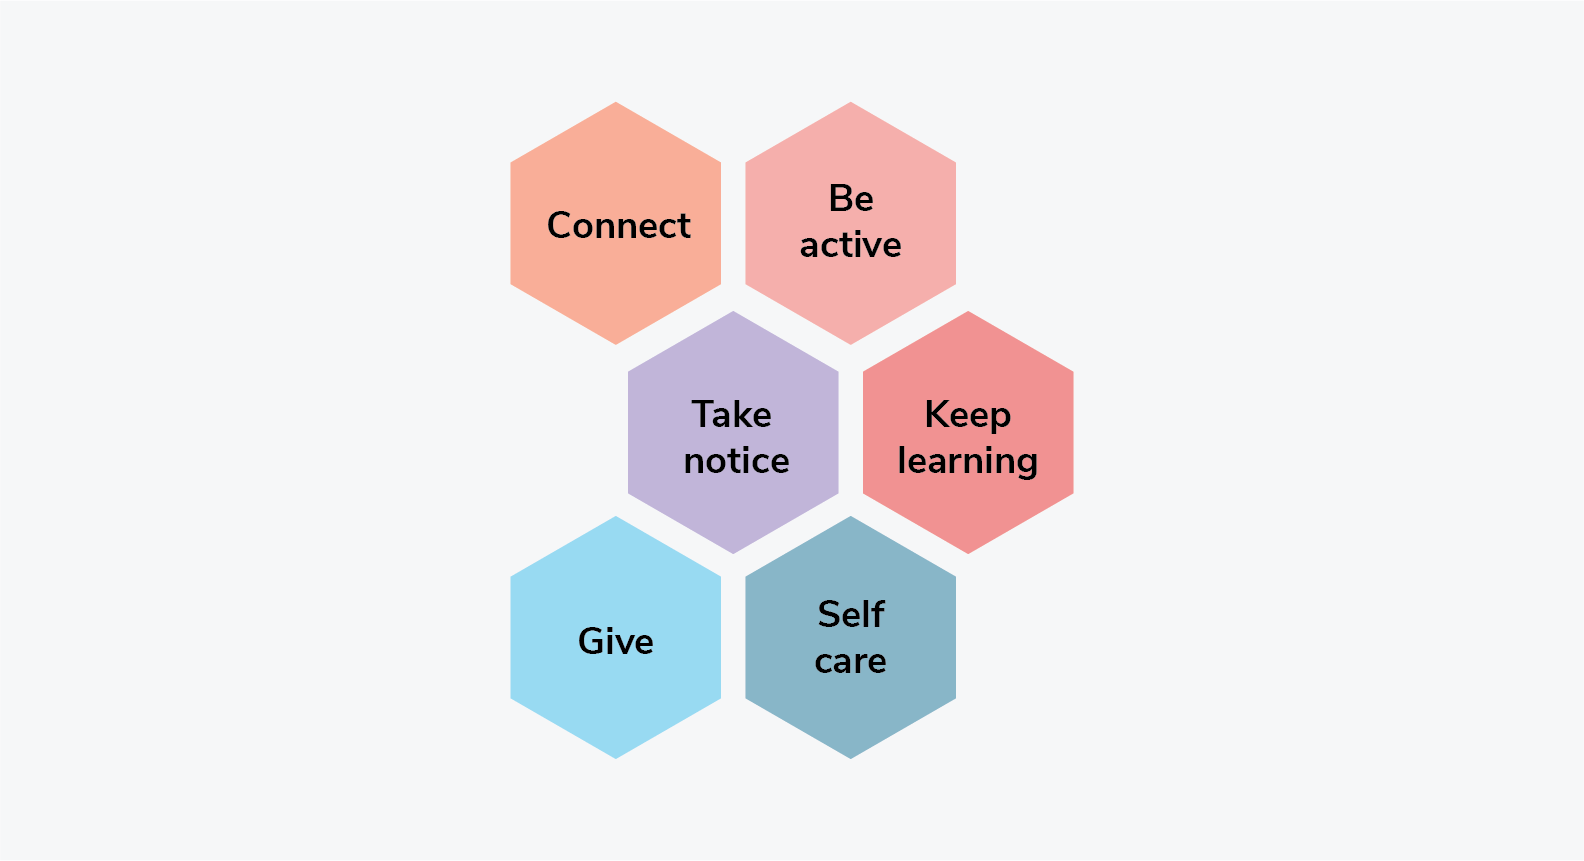 visual representation of the six key actions to enhance well-being. Connect, Be Alive, Take notice, Keep learning, Give, Self care.